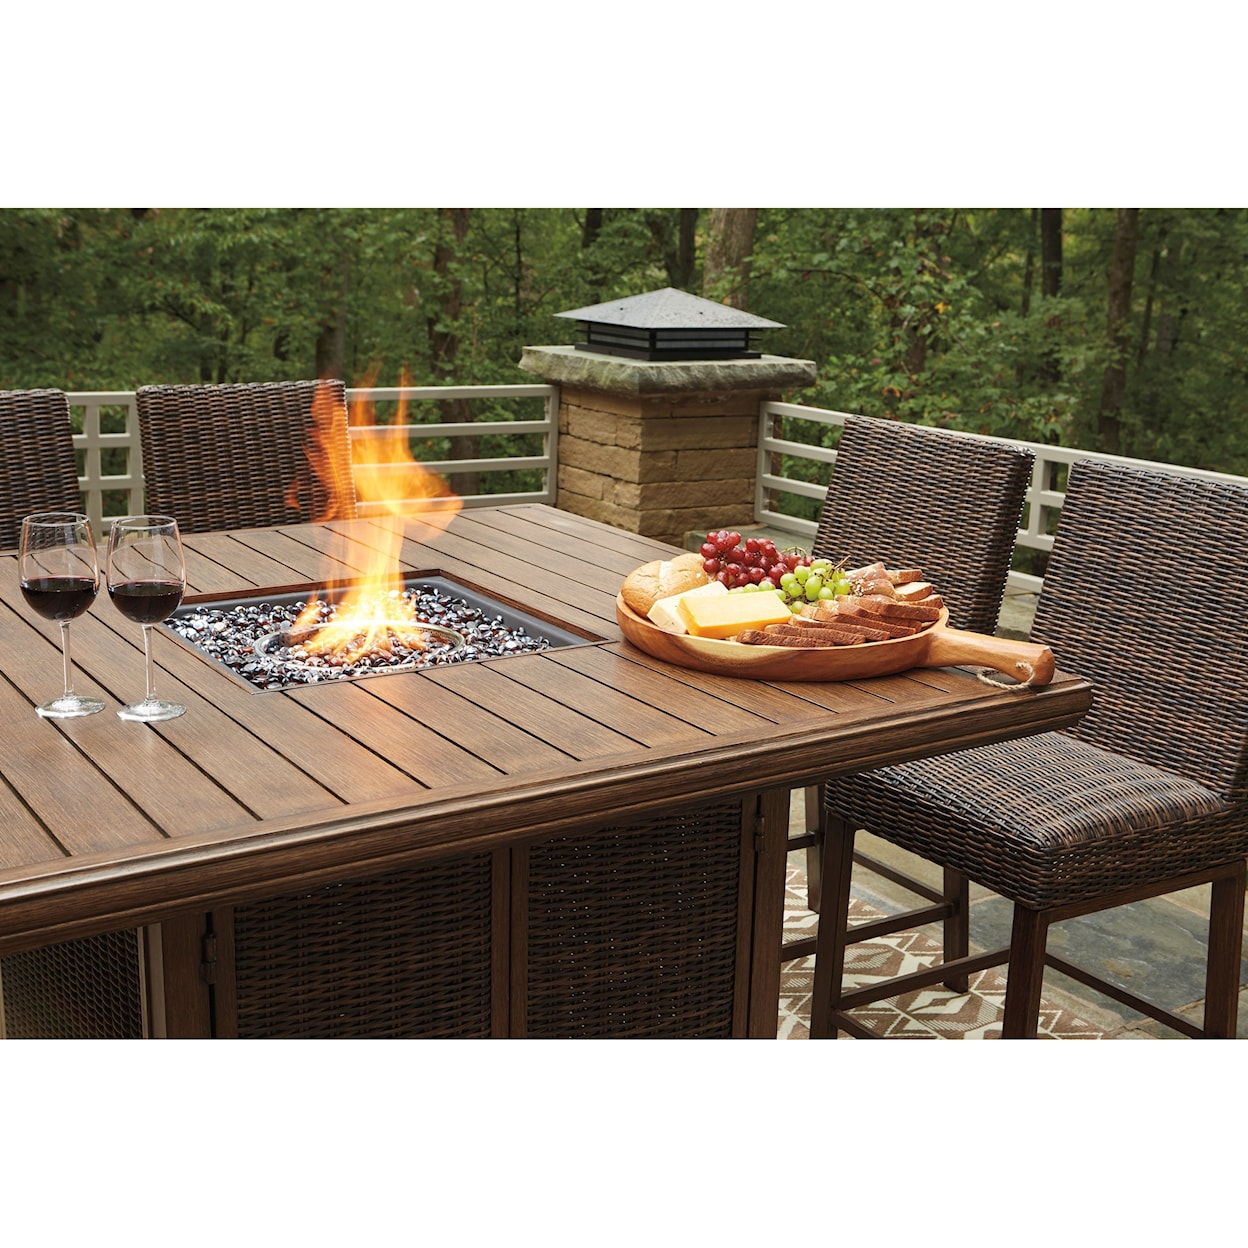 Signature Paradise Trail Square Bar Table with Fire Pit